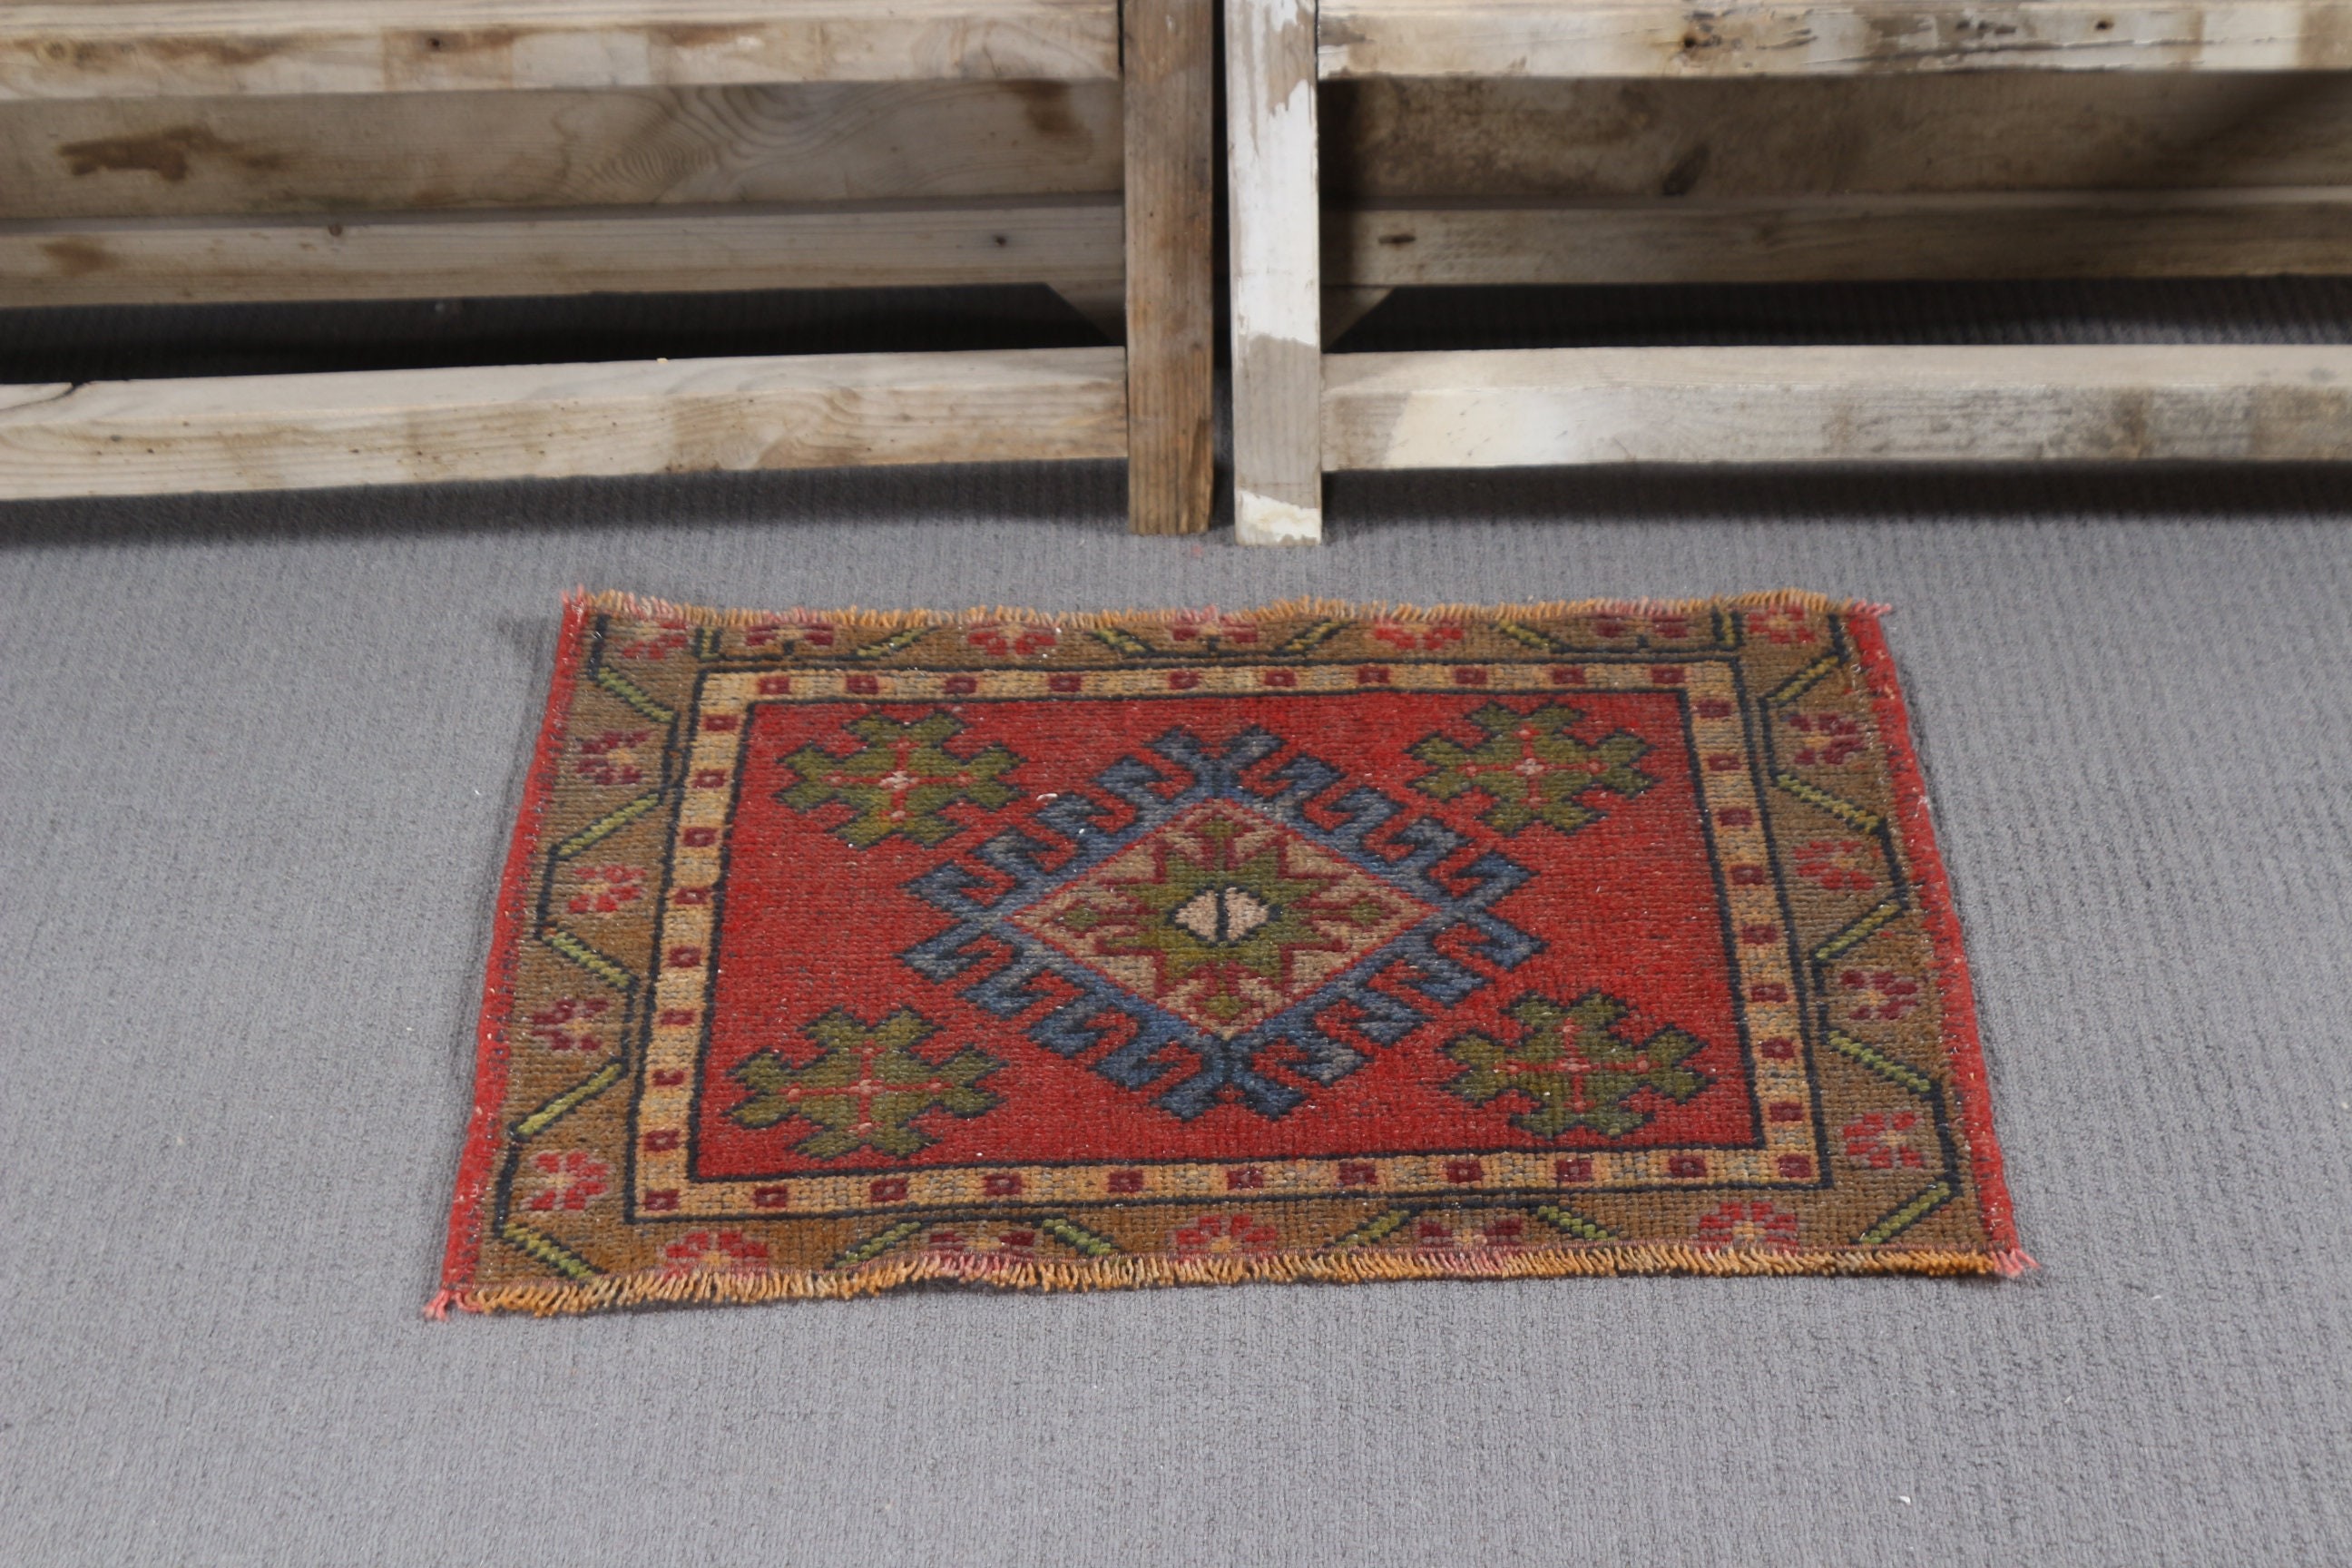 Vintage Rug, Bathroom Rug, Red Kitchen Rug, 1.8x2.2 ft Small Rug, Turkish Rug, Door Mat Rug, Cool Rugs, Rugs for Entry, Kitchen Rugs